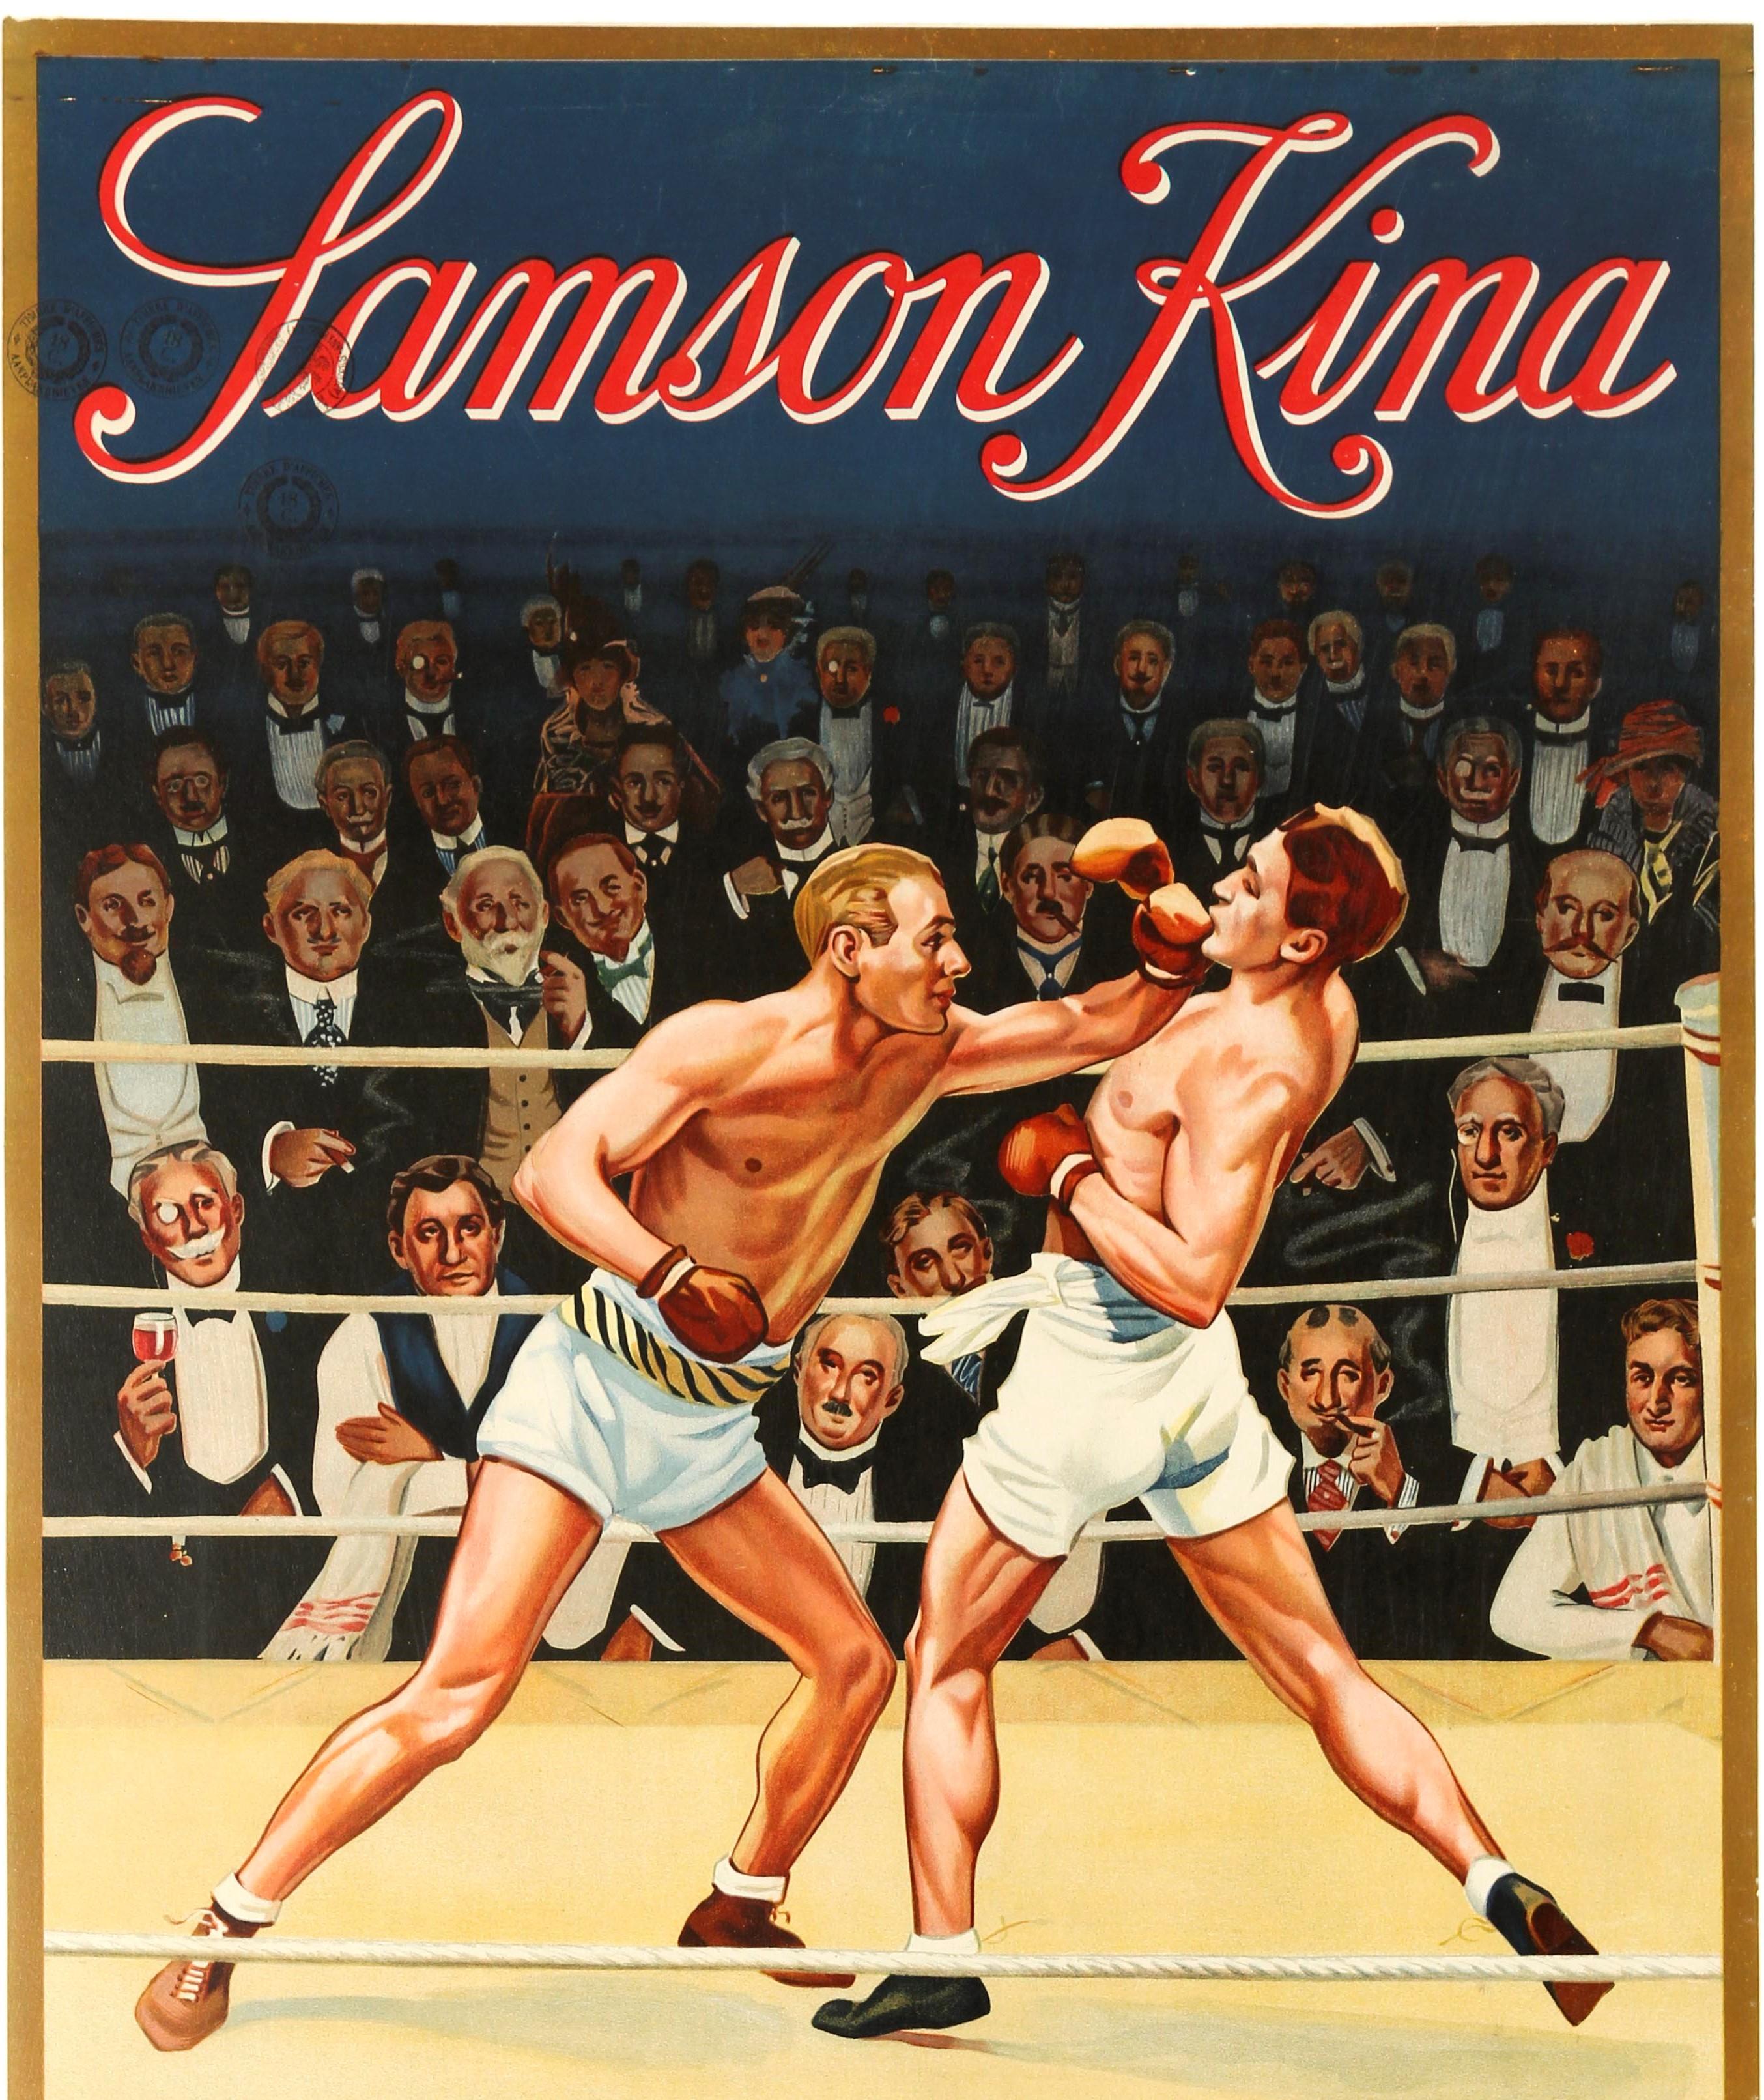 Original vintage drink advertising poster for the Belgian aperitif Samson Kina featuring colourful artwork depicting a crowded boxing match with two men boxing in the ring and the smartly dressed spectators watching the fight on both sides, some